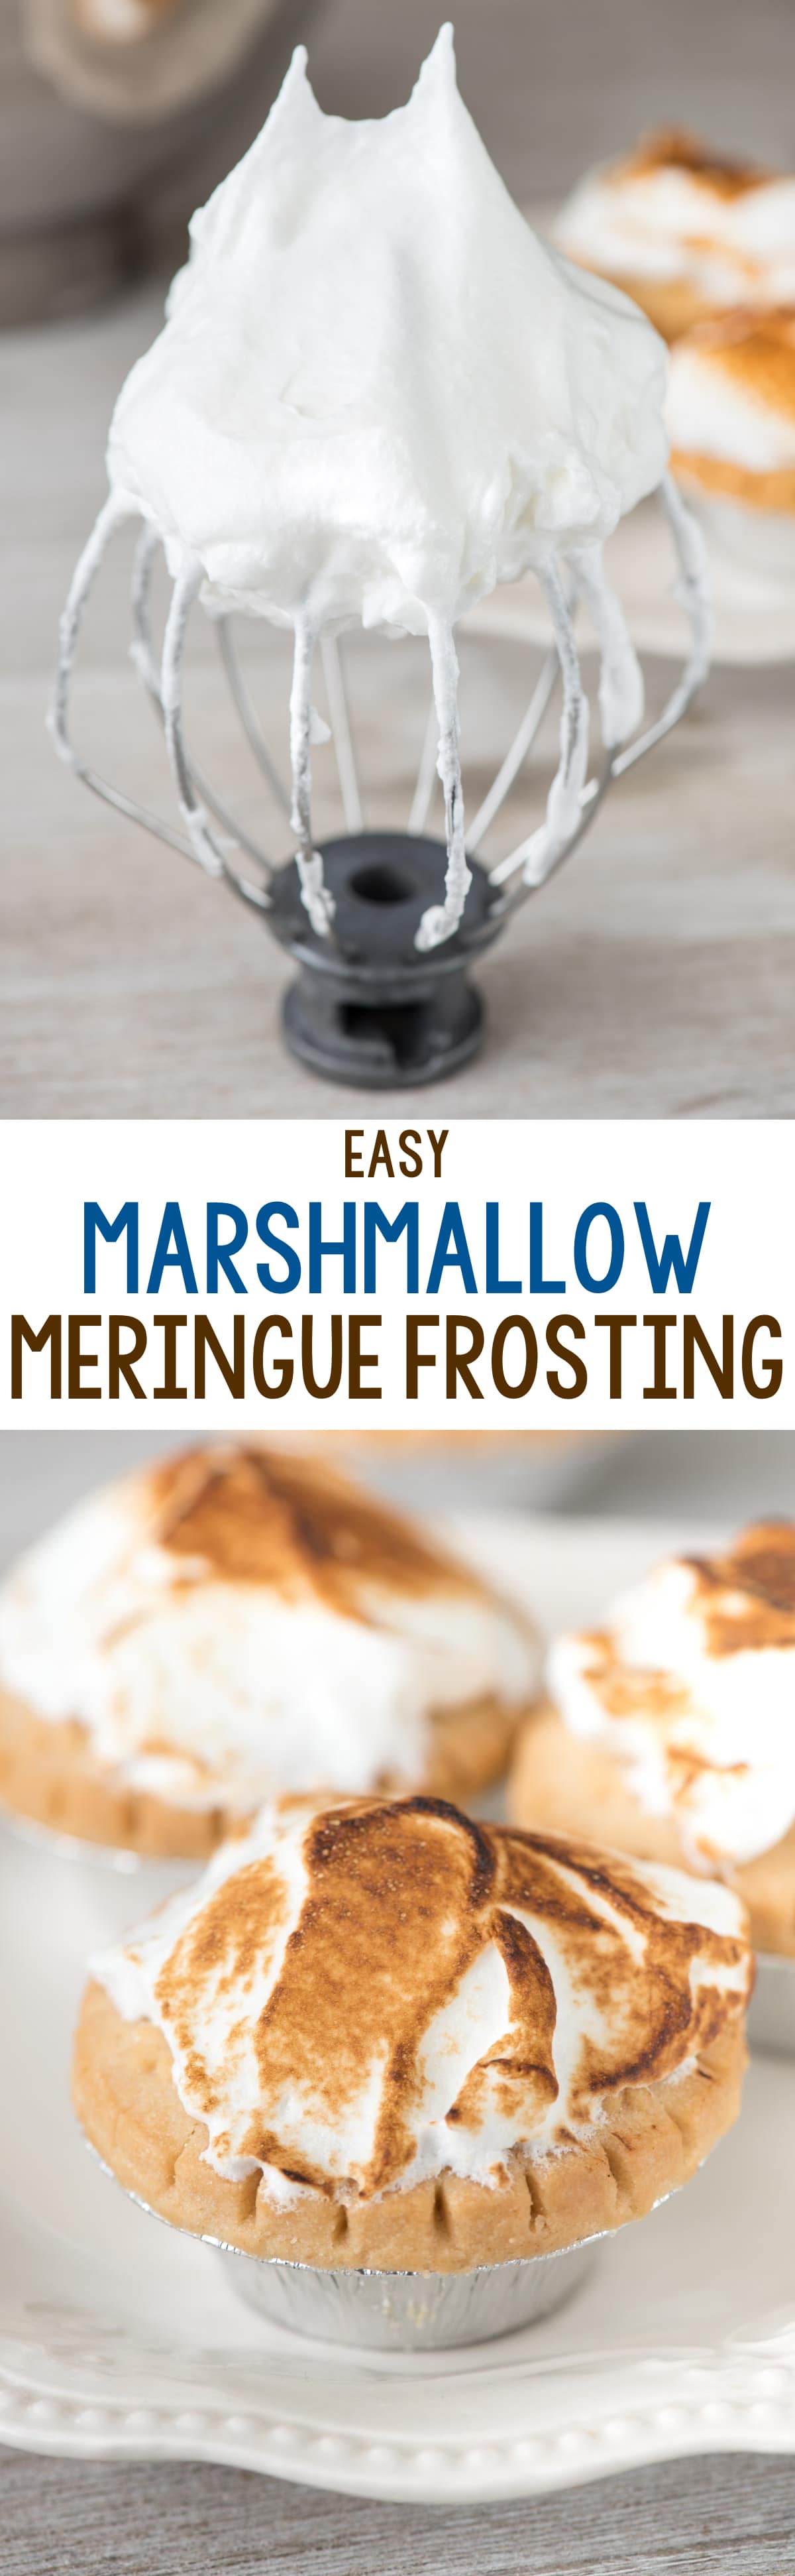 easy-Easy Marshmallow Meringue Frosting - this meringue tastes like a melted marshmallow and is the perfect way to dress up pies, cupcakes, and brownies!-meringue-frosting